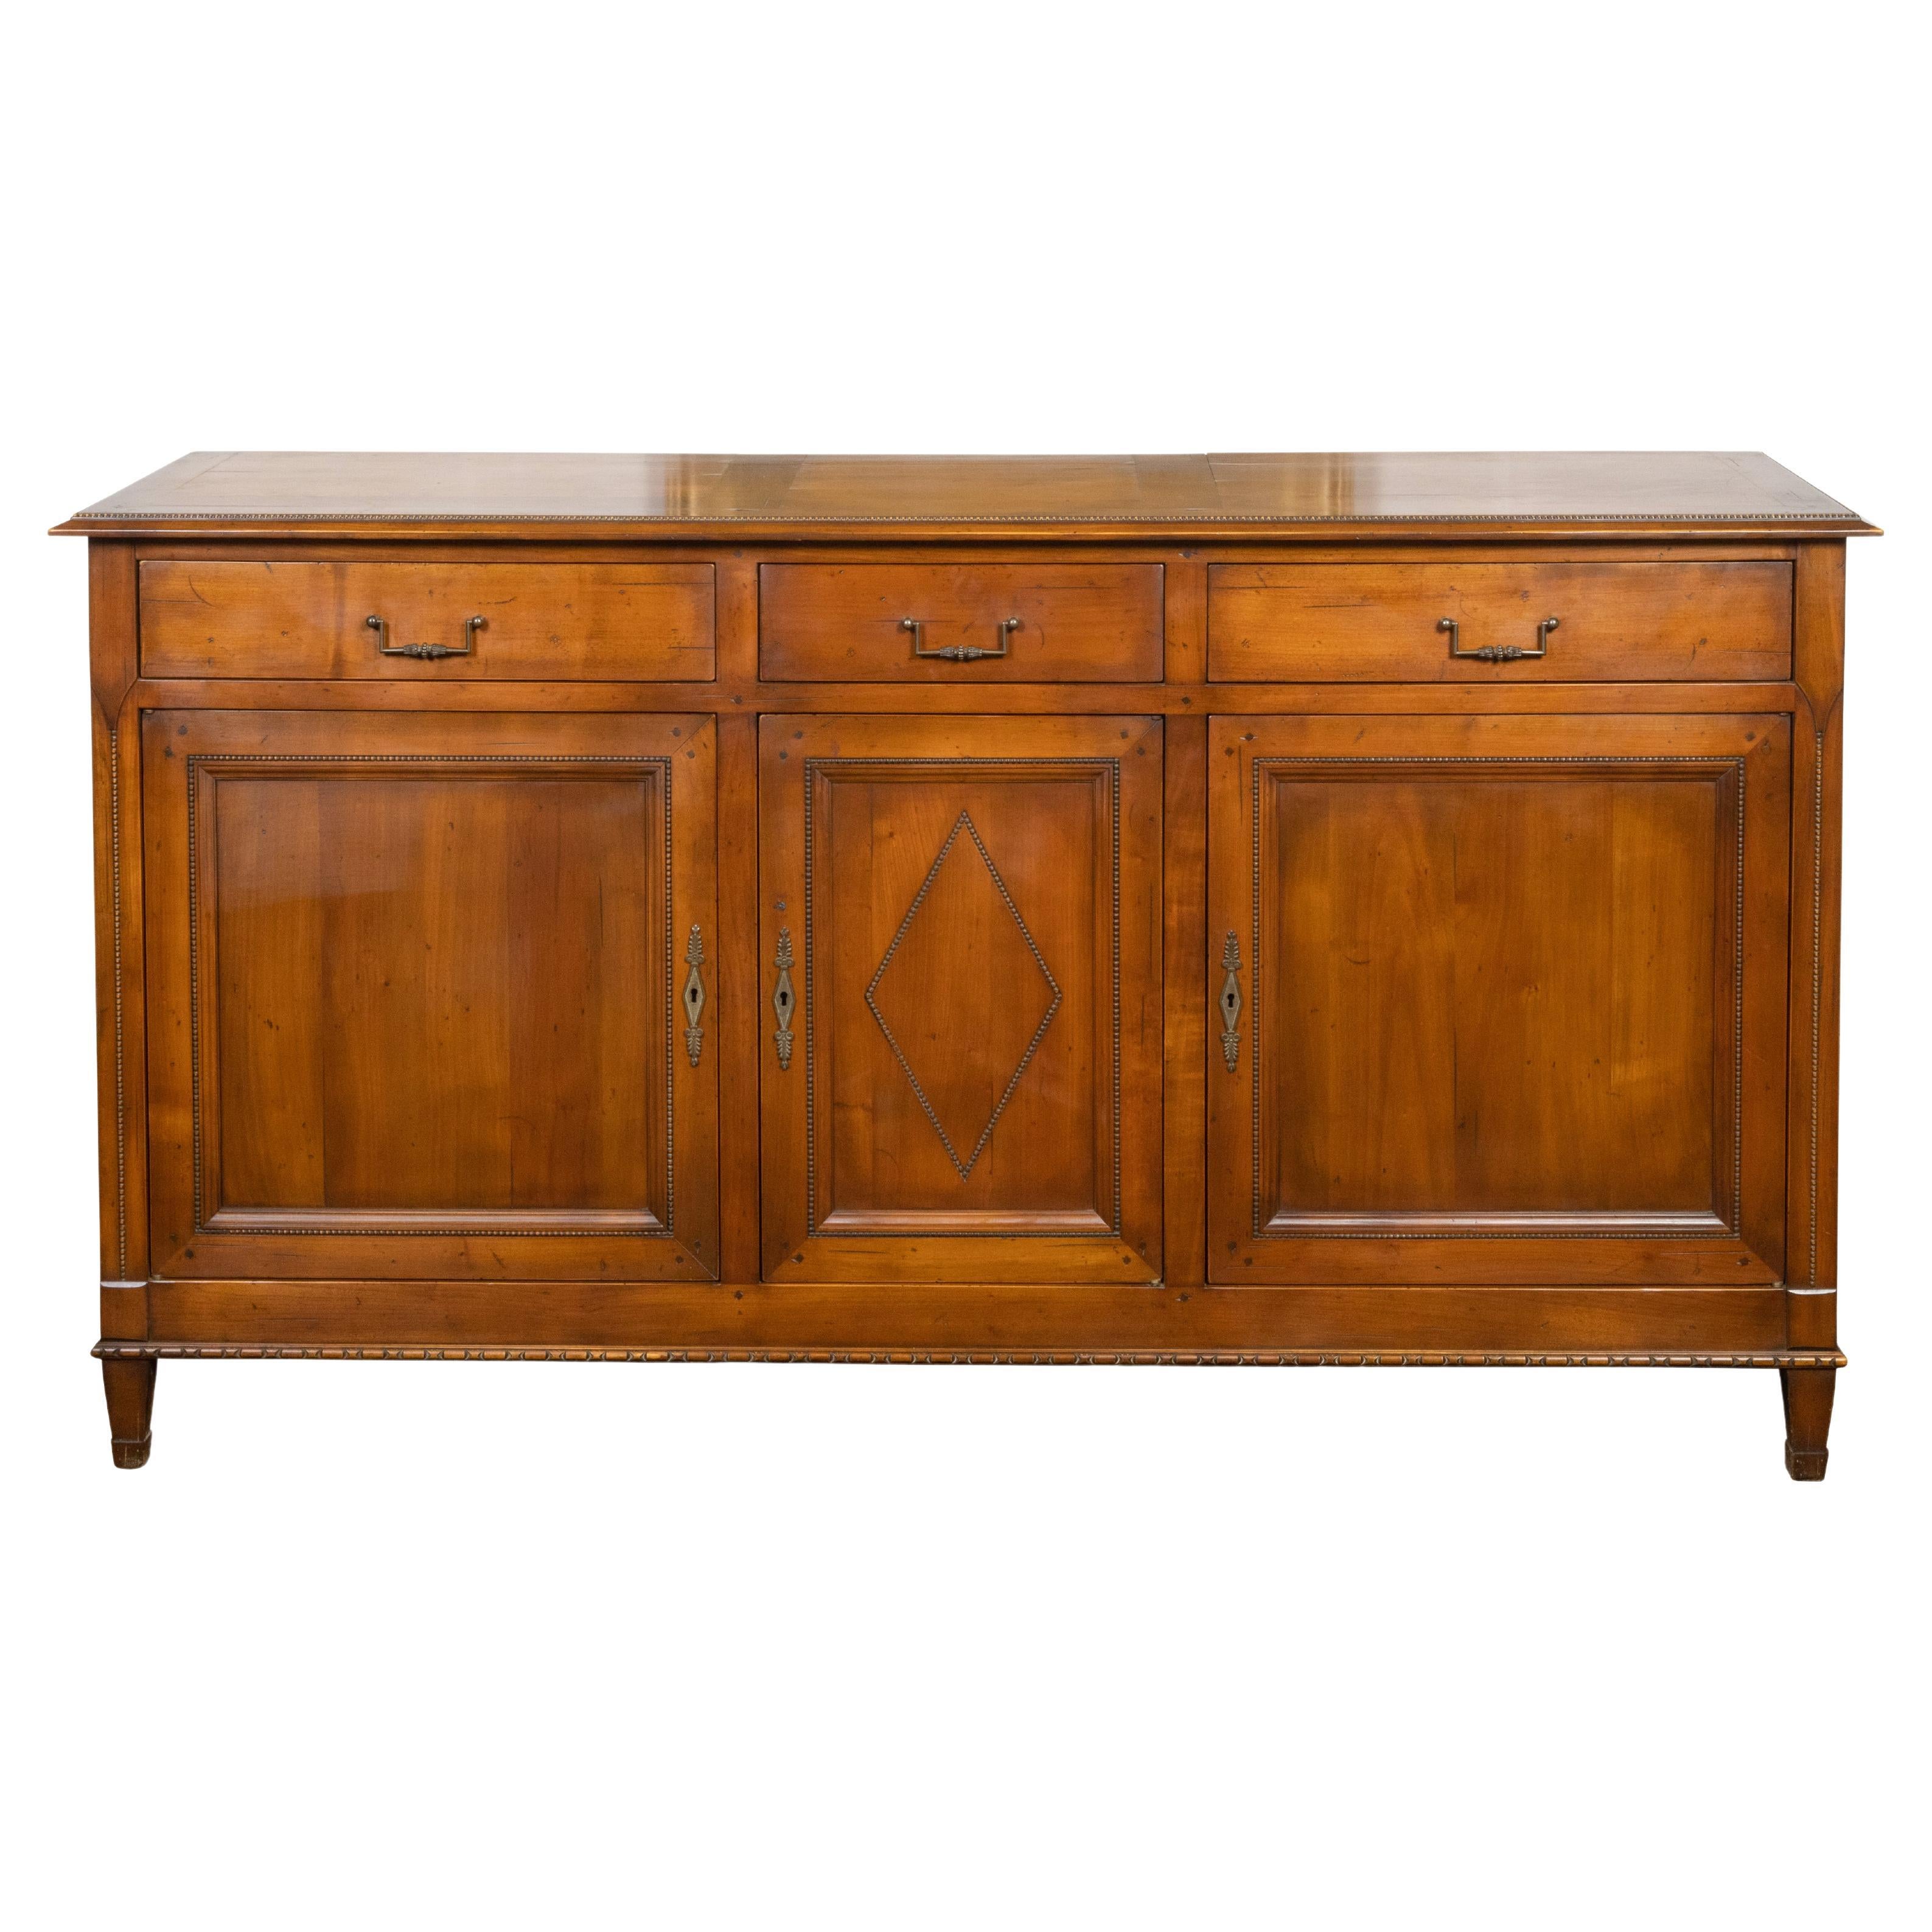 French 1940s Walnut Enfilade with Drawers, Doors, Carved Beads and Diamond Motif For Sale